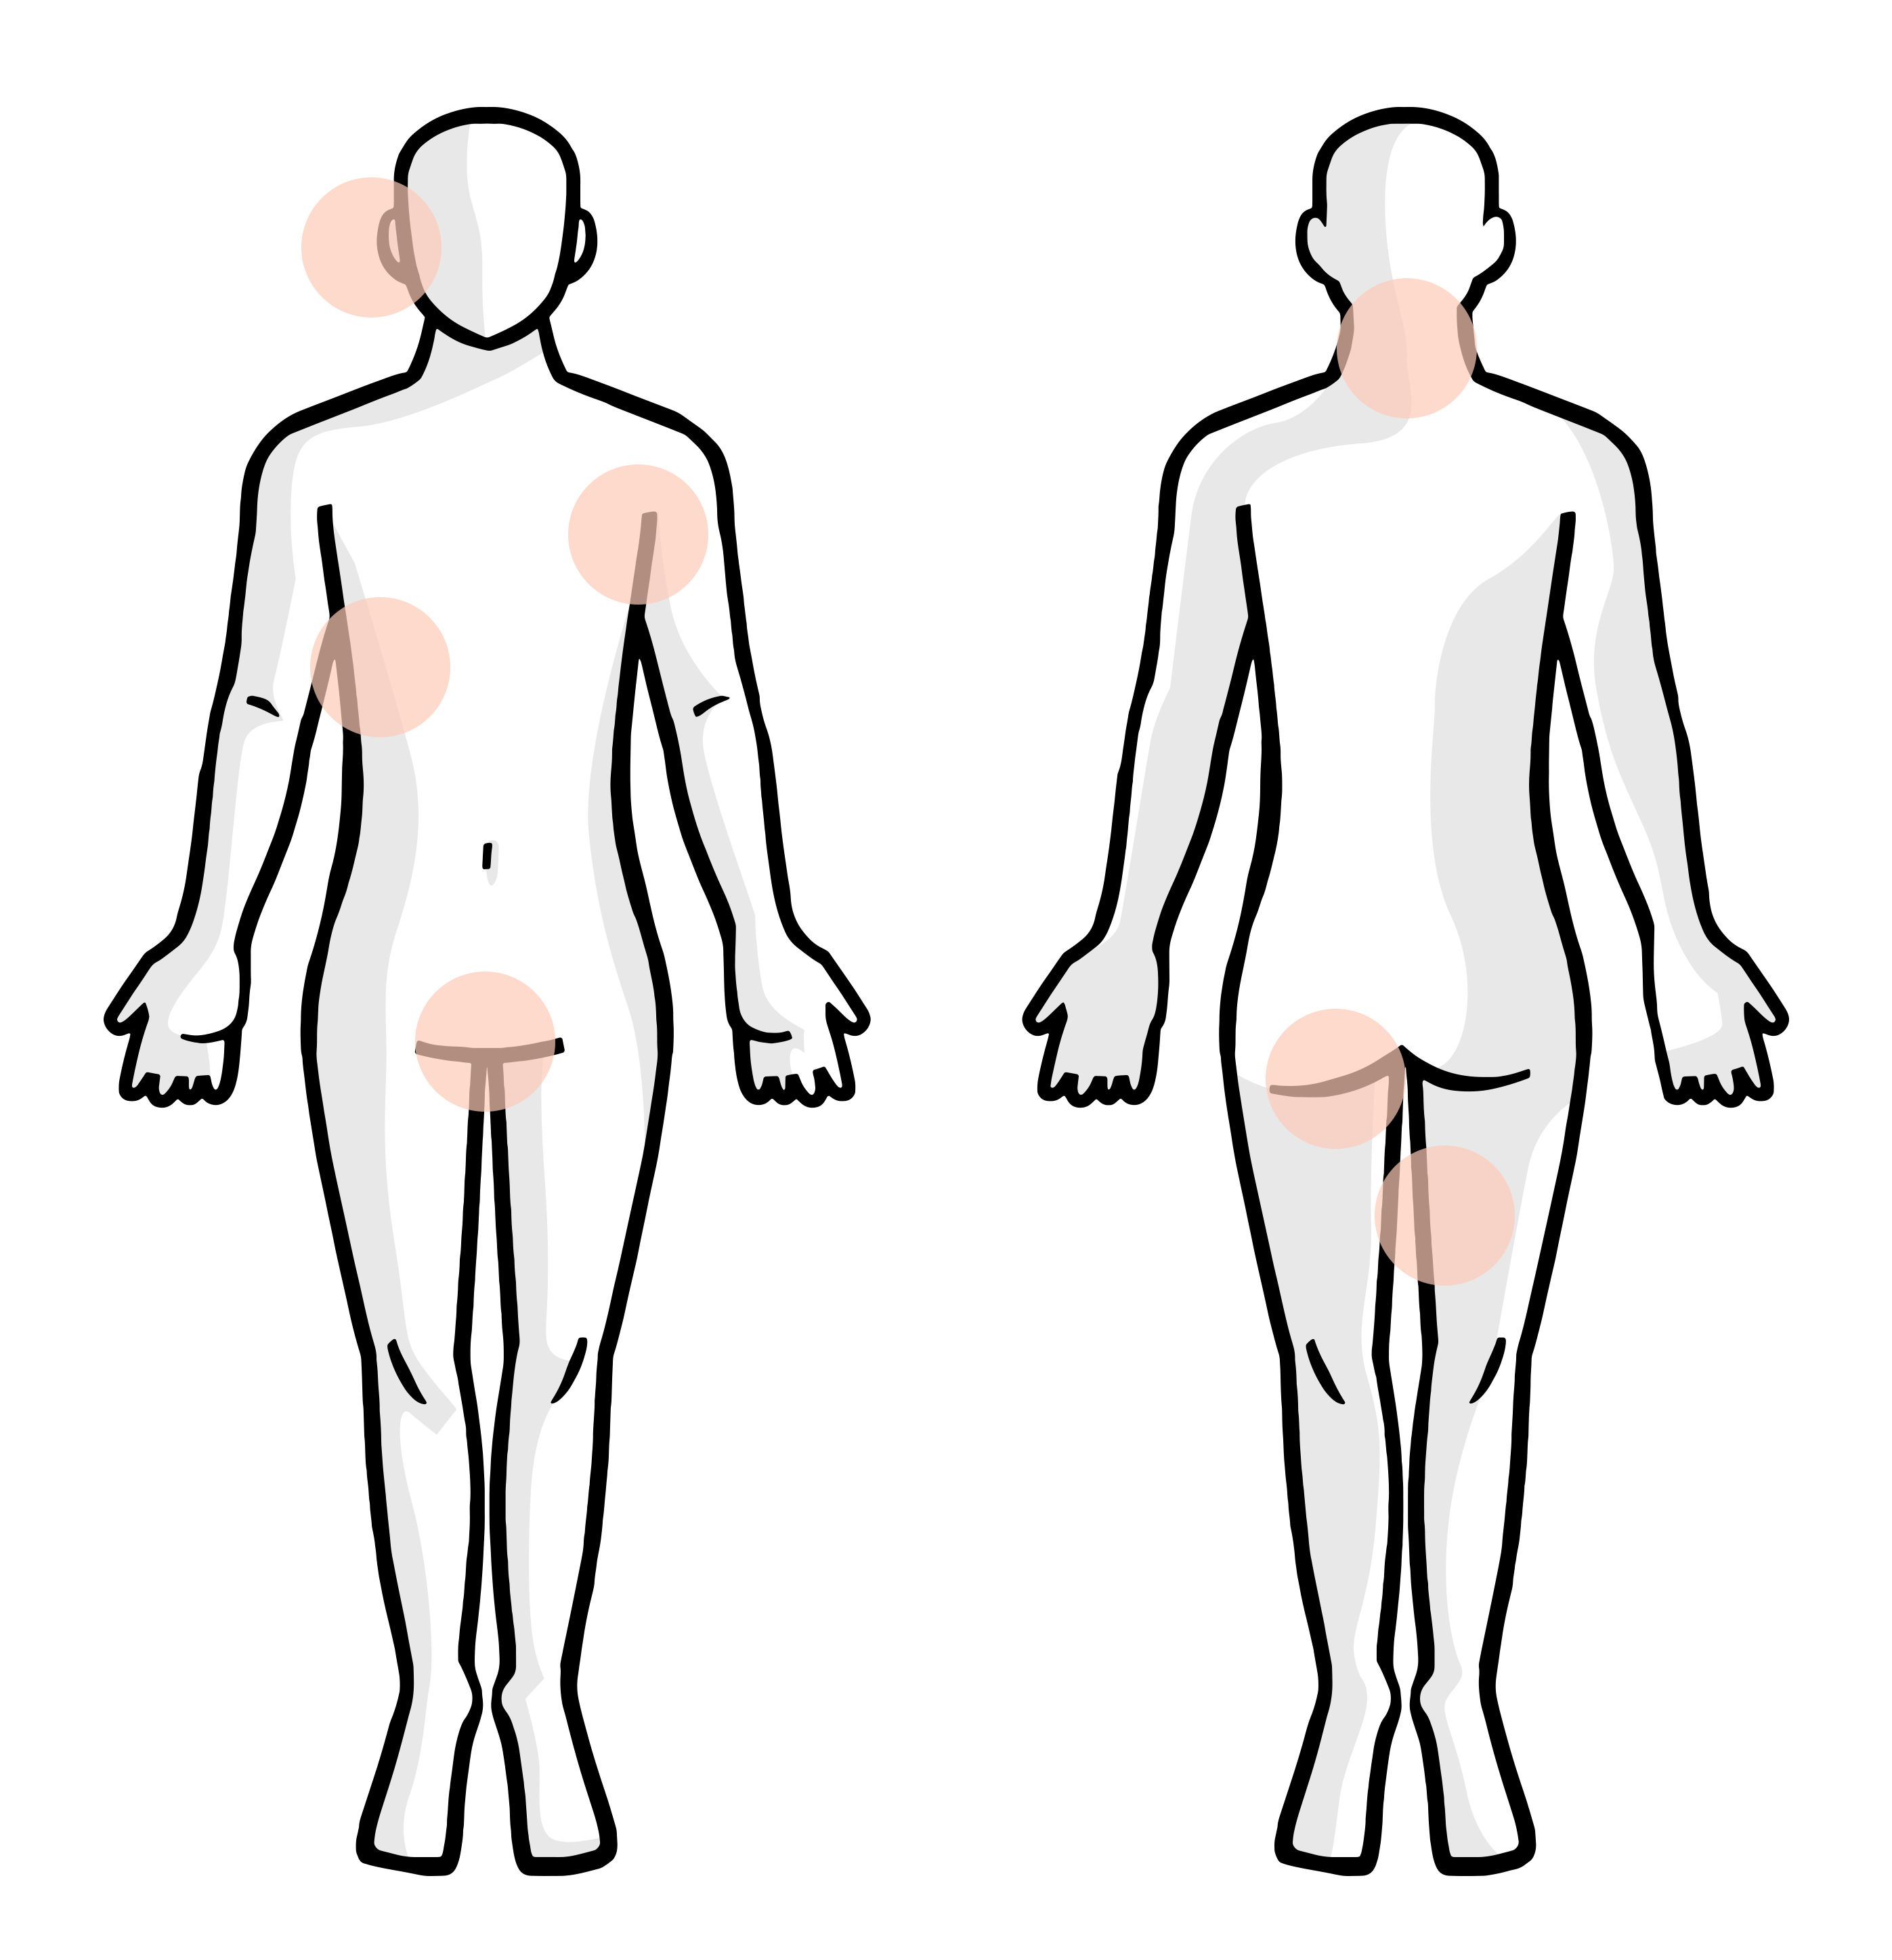 Illustration of a body with highlights on areas affected by hidradenitis suppurativa